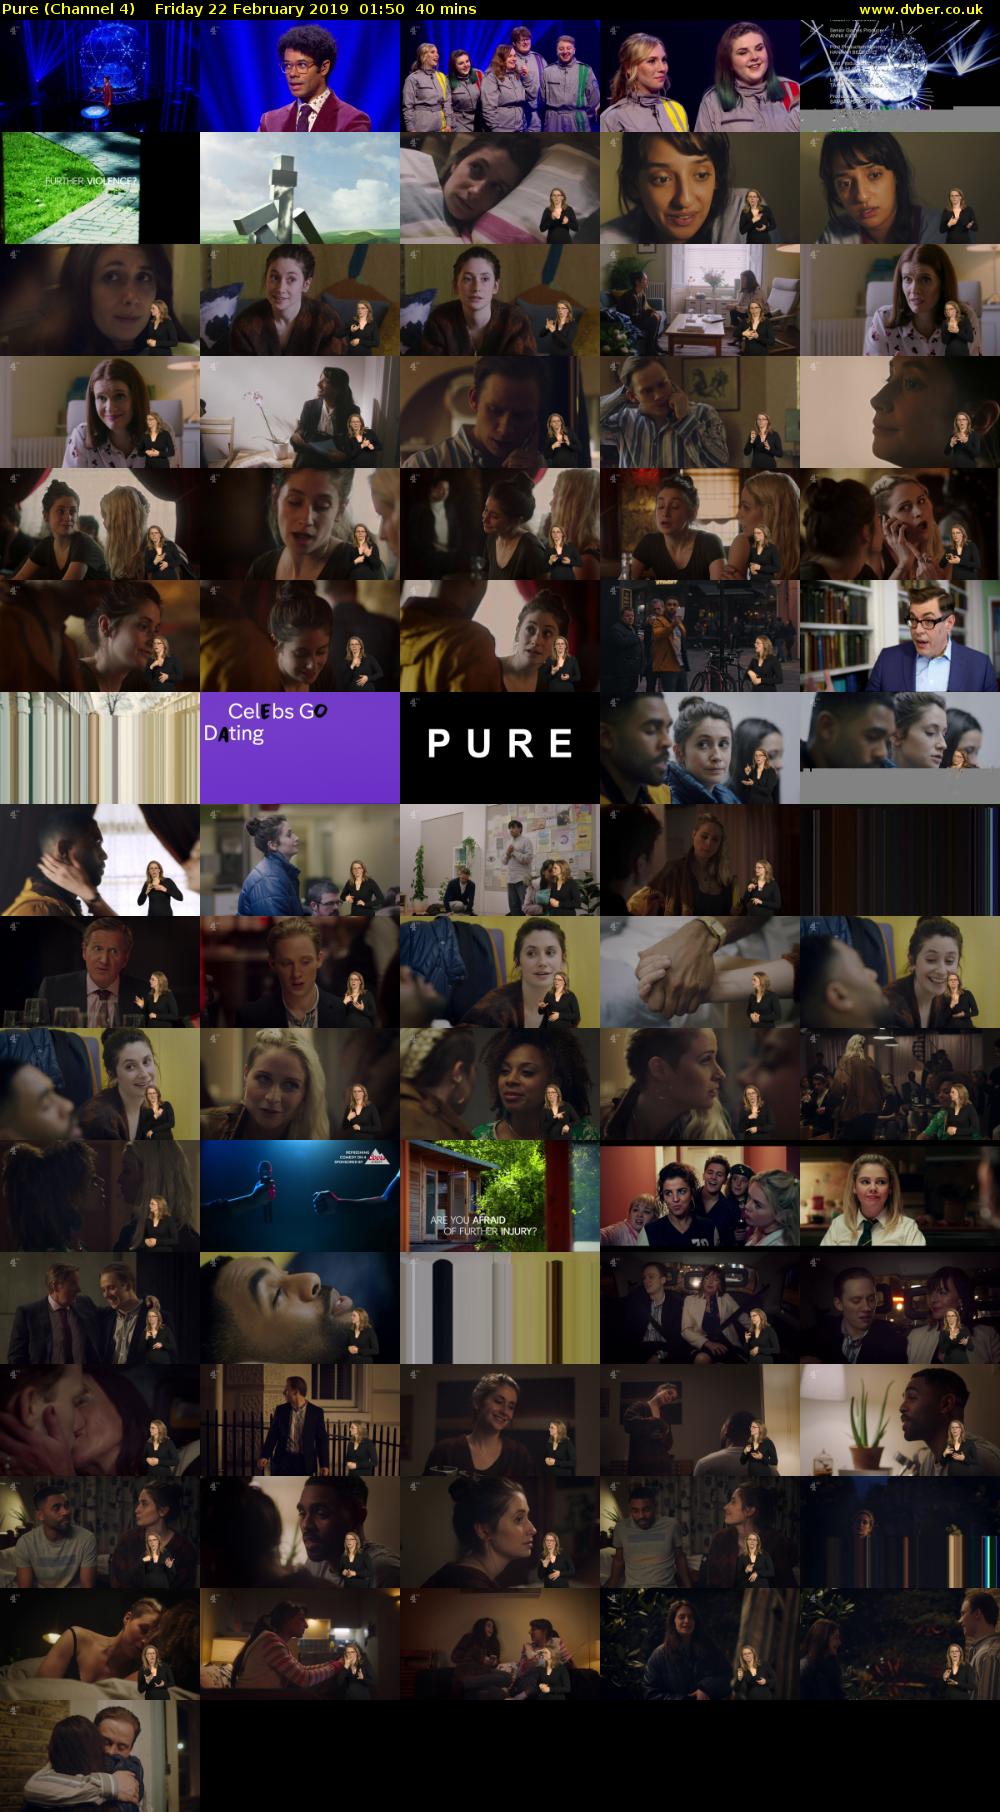 Pure (Channel 4) Friday 22 February 2019 01:50 - 02:30